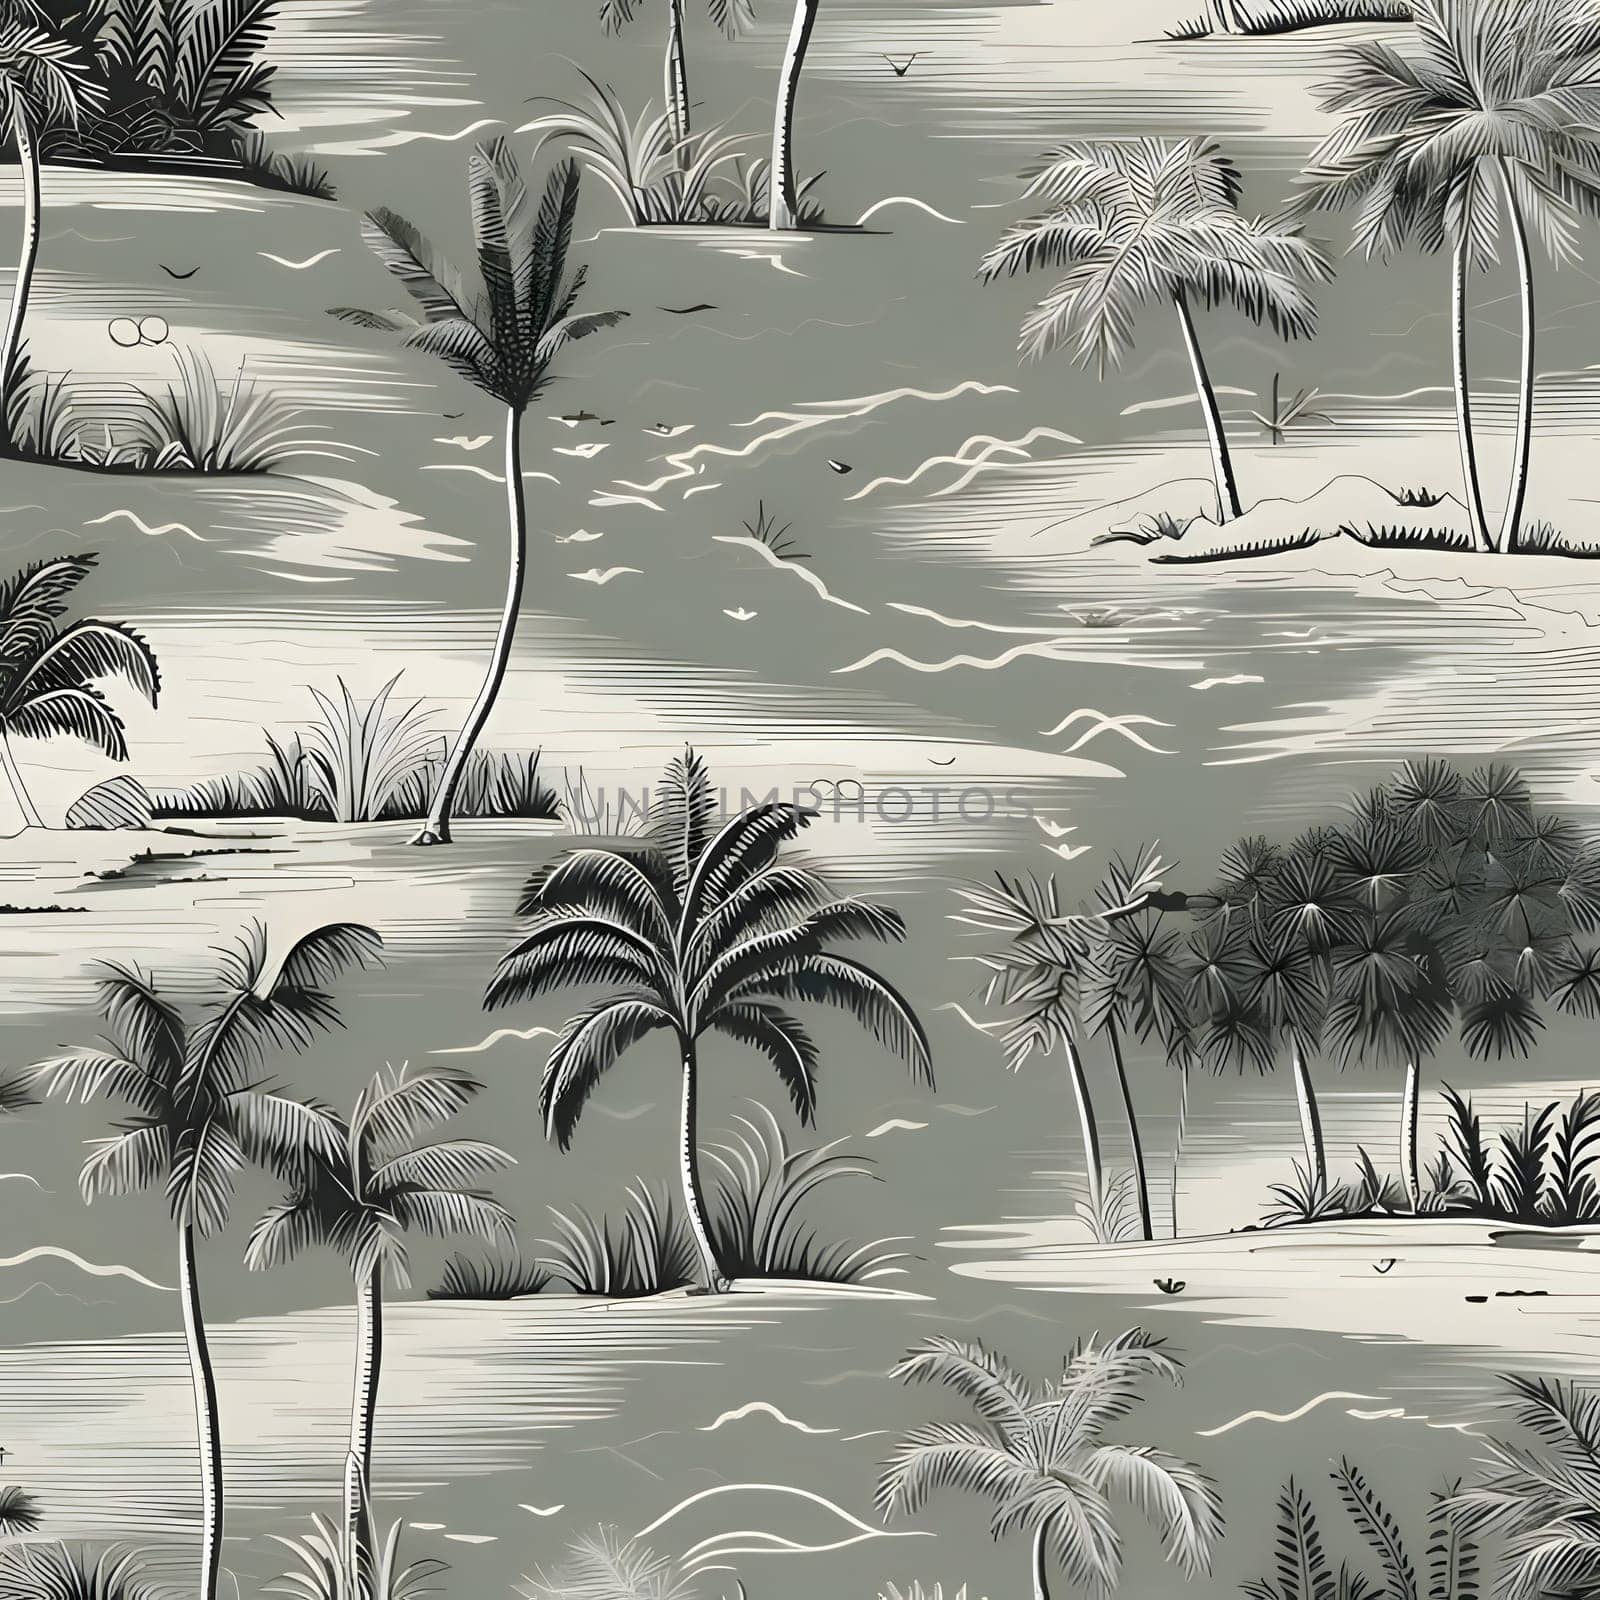 Patterns and banners backgrounds: Seamless pattern with palm trees on the beach. Vector illustration